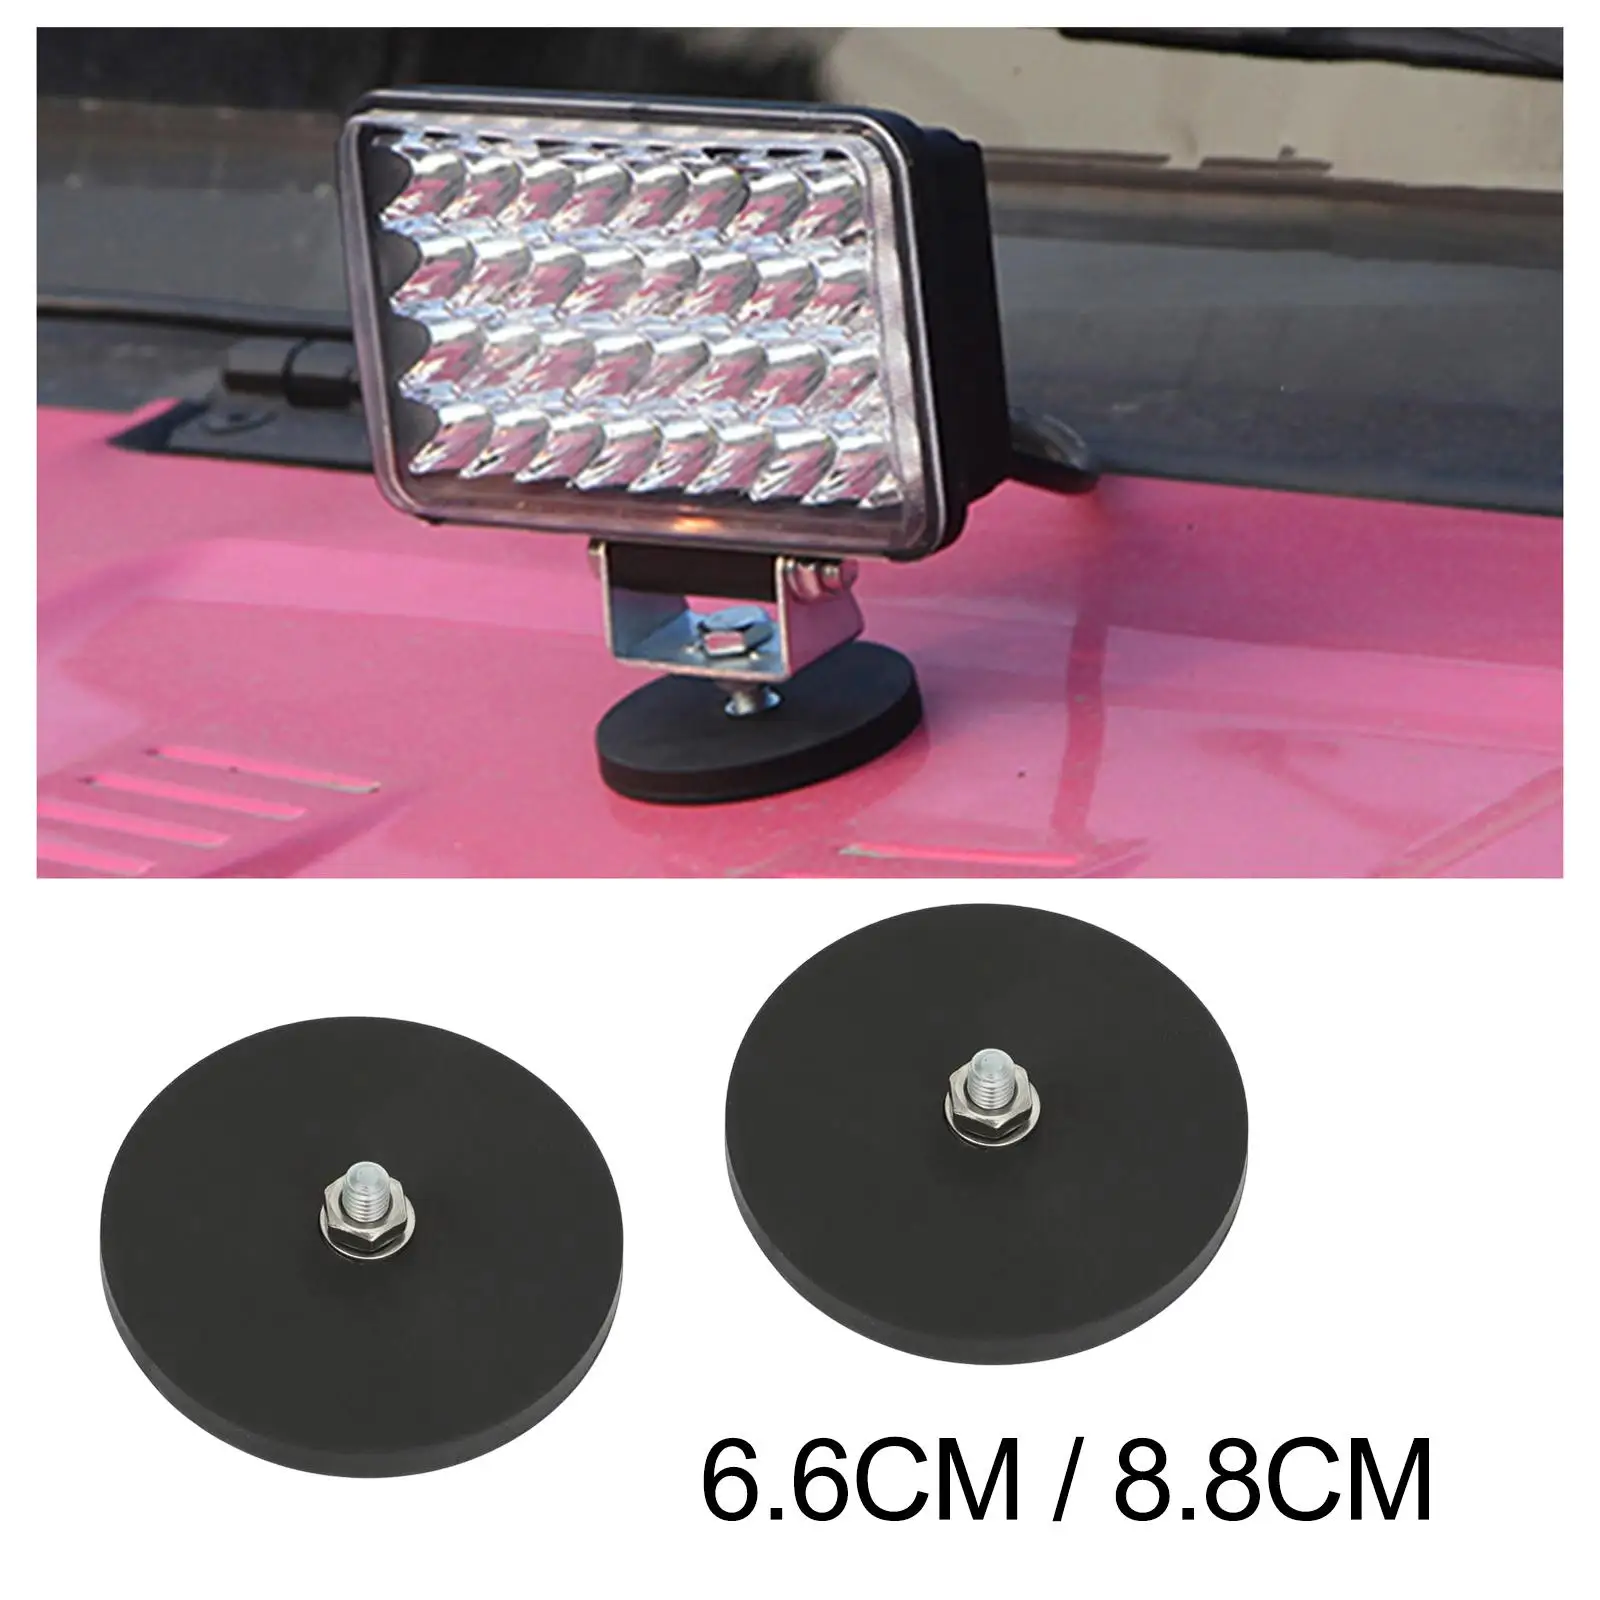 s LED Light Bar Mounting Brackets, with Rubber Pad,  Holder,  Mounting Brackets, Fit for Roof Light Bar, 